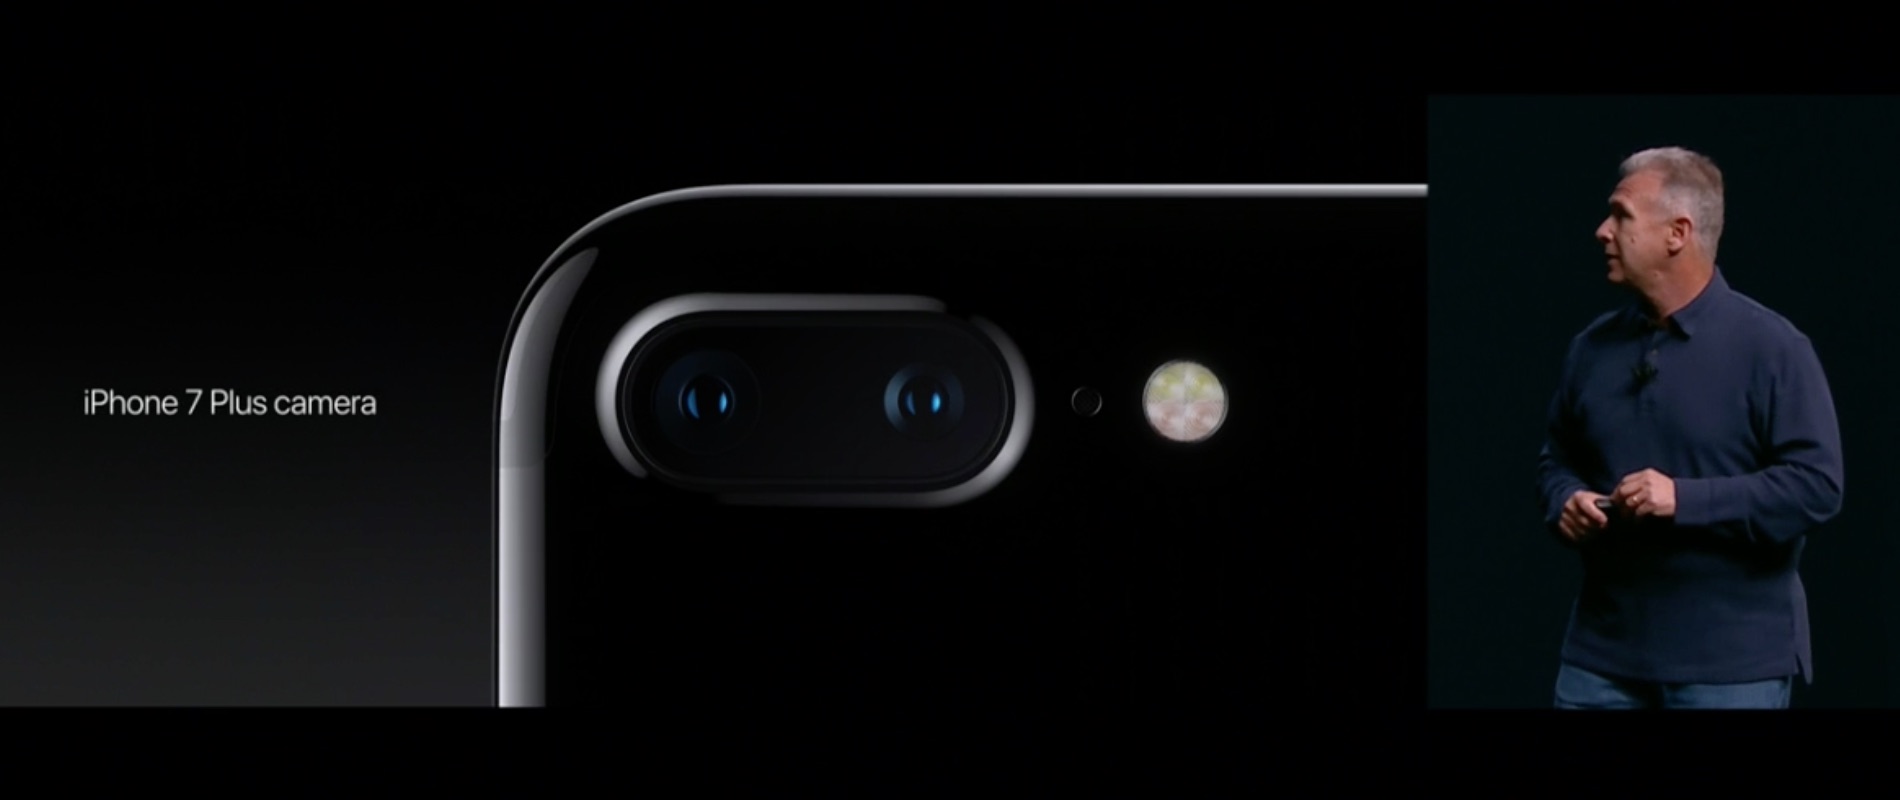 iphone7-plus-special-events-2016-sep-16